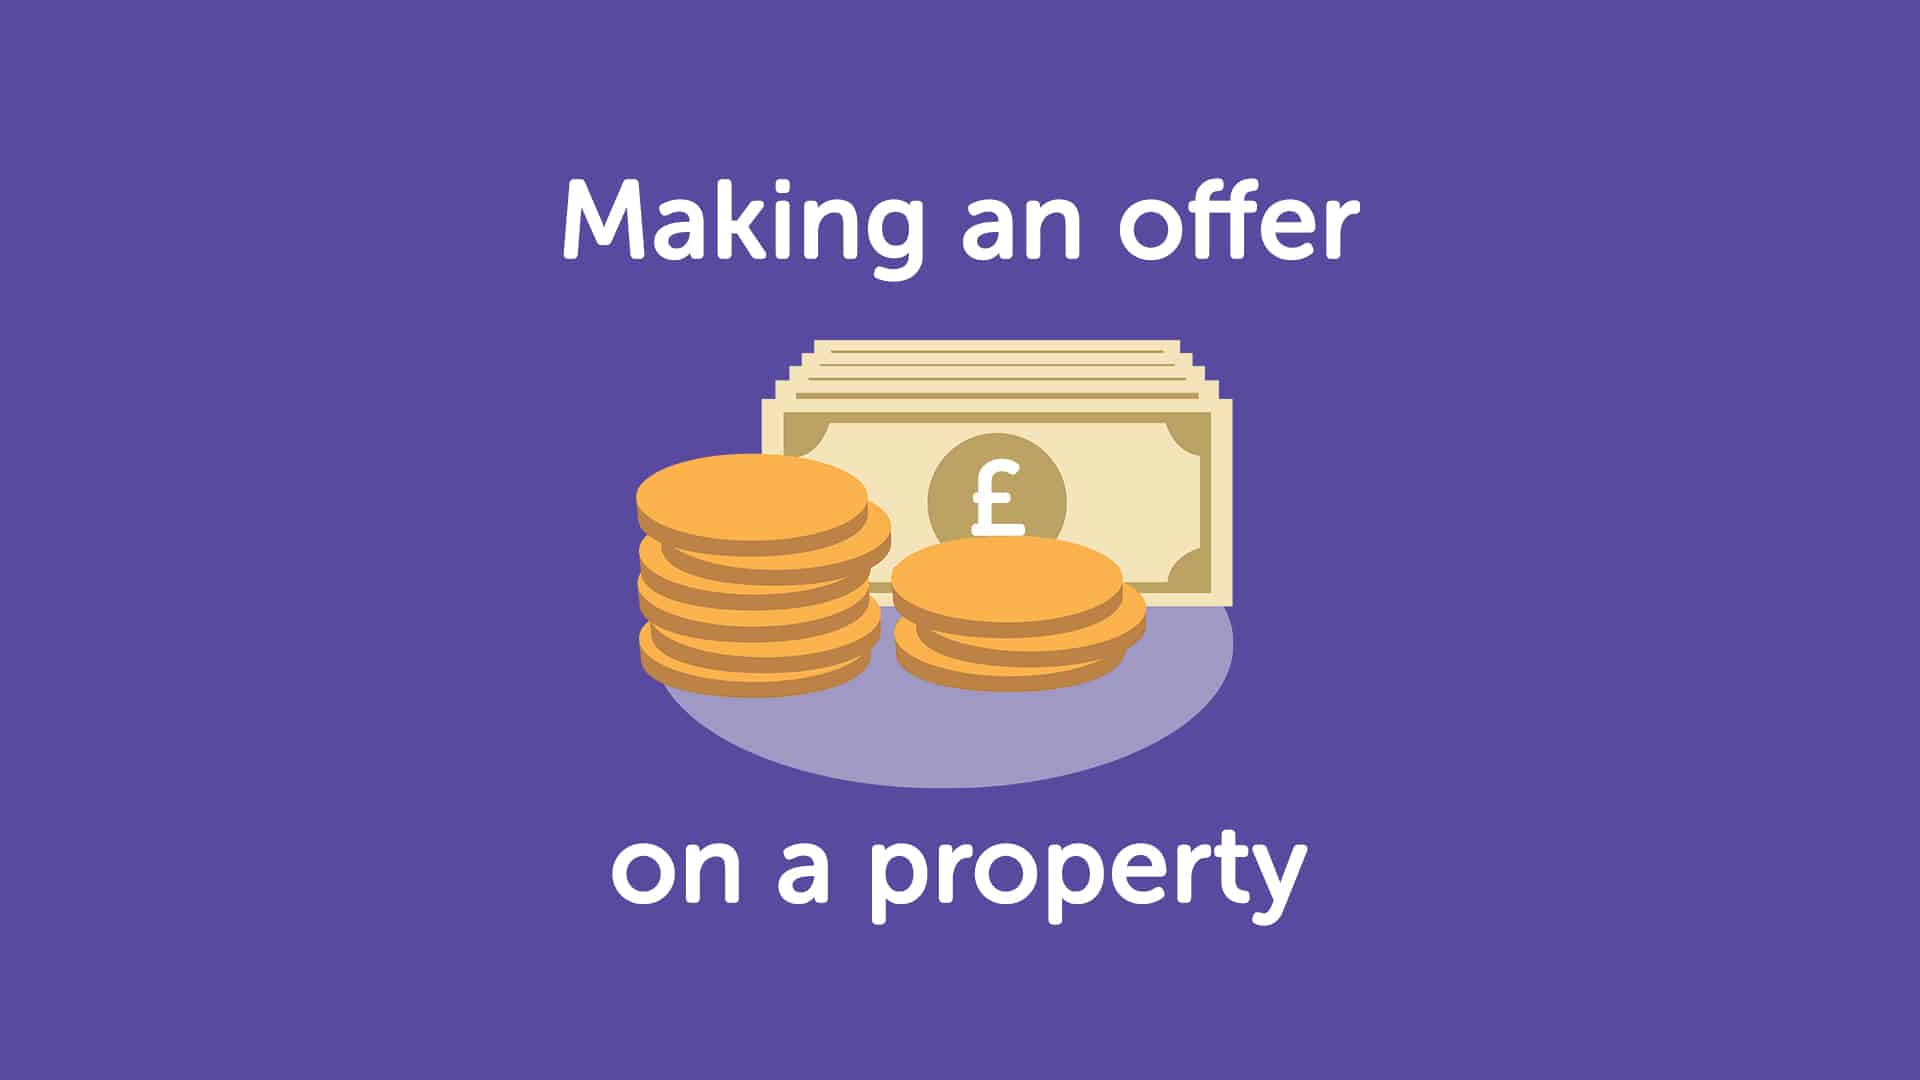 How to Make an Offer on a Property in Newcastle?